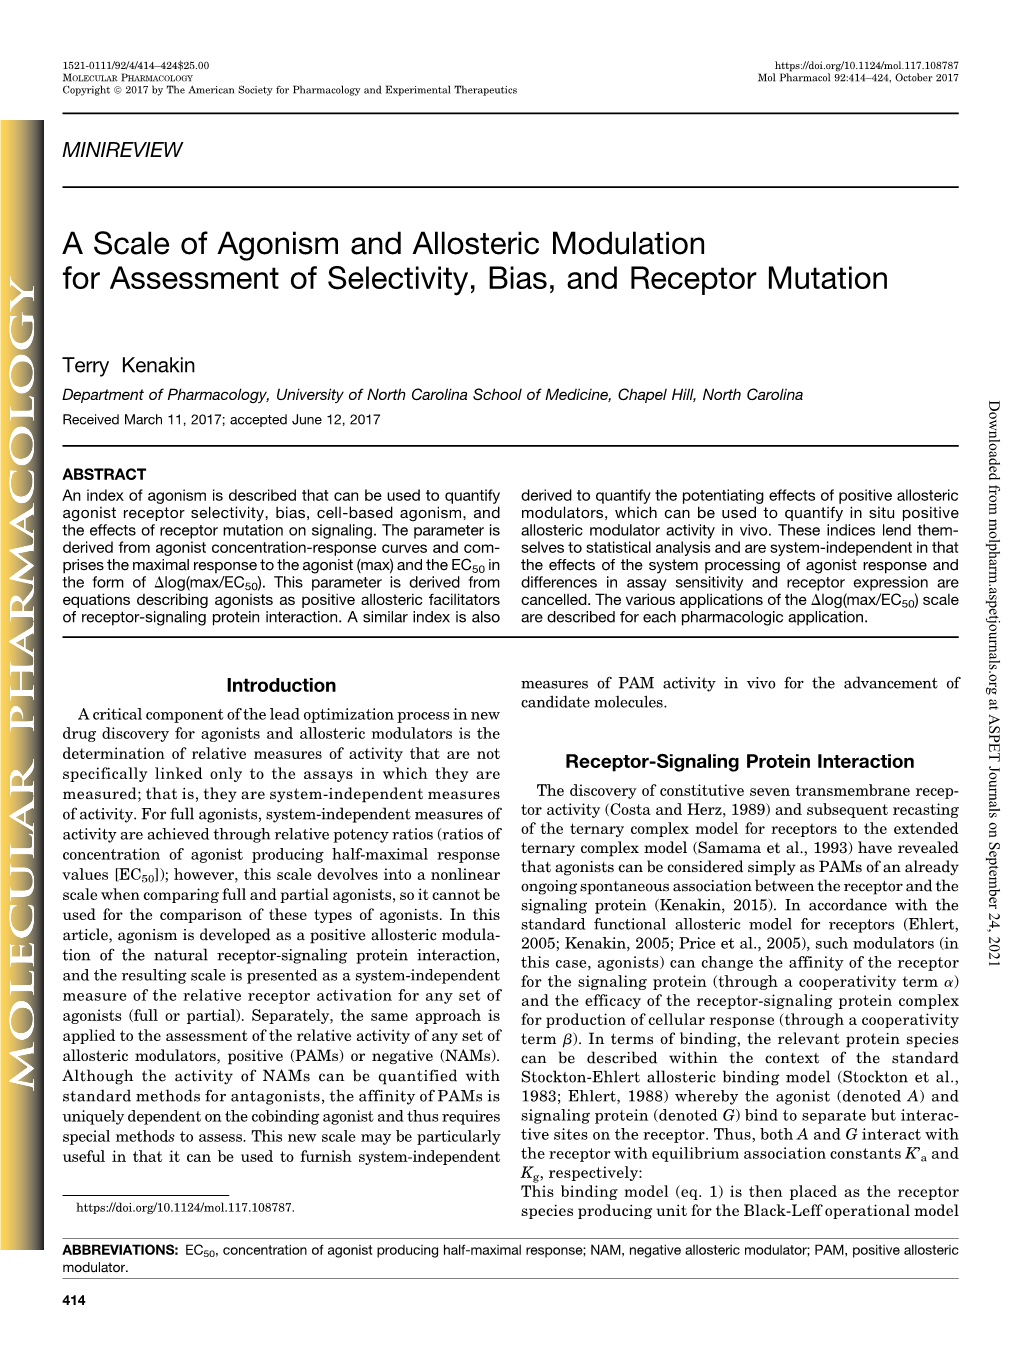 A Scale of Agonism and Allosteric Modulation for Assessment of Selectivity, Bias, and Receptor Mutation